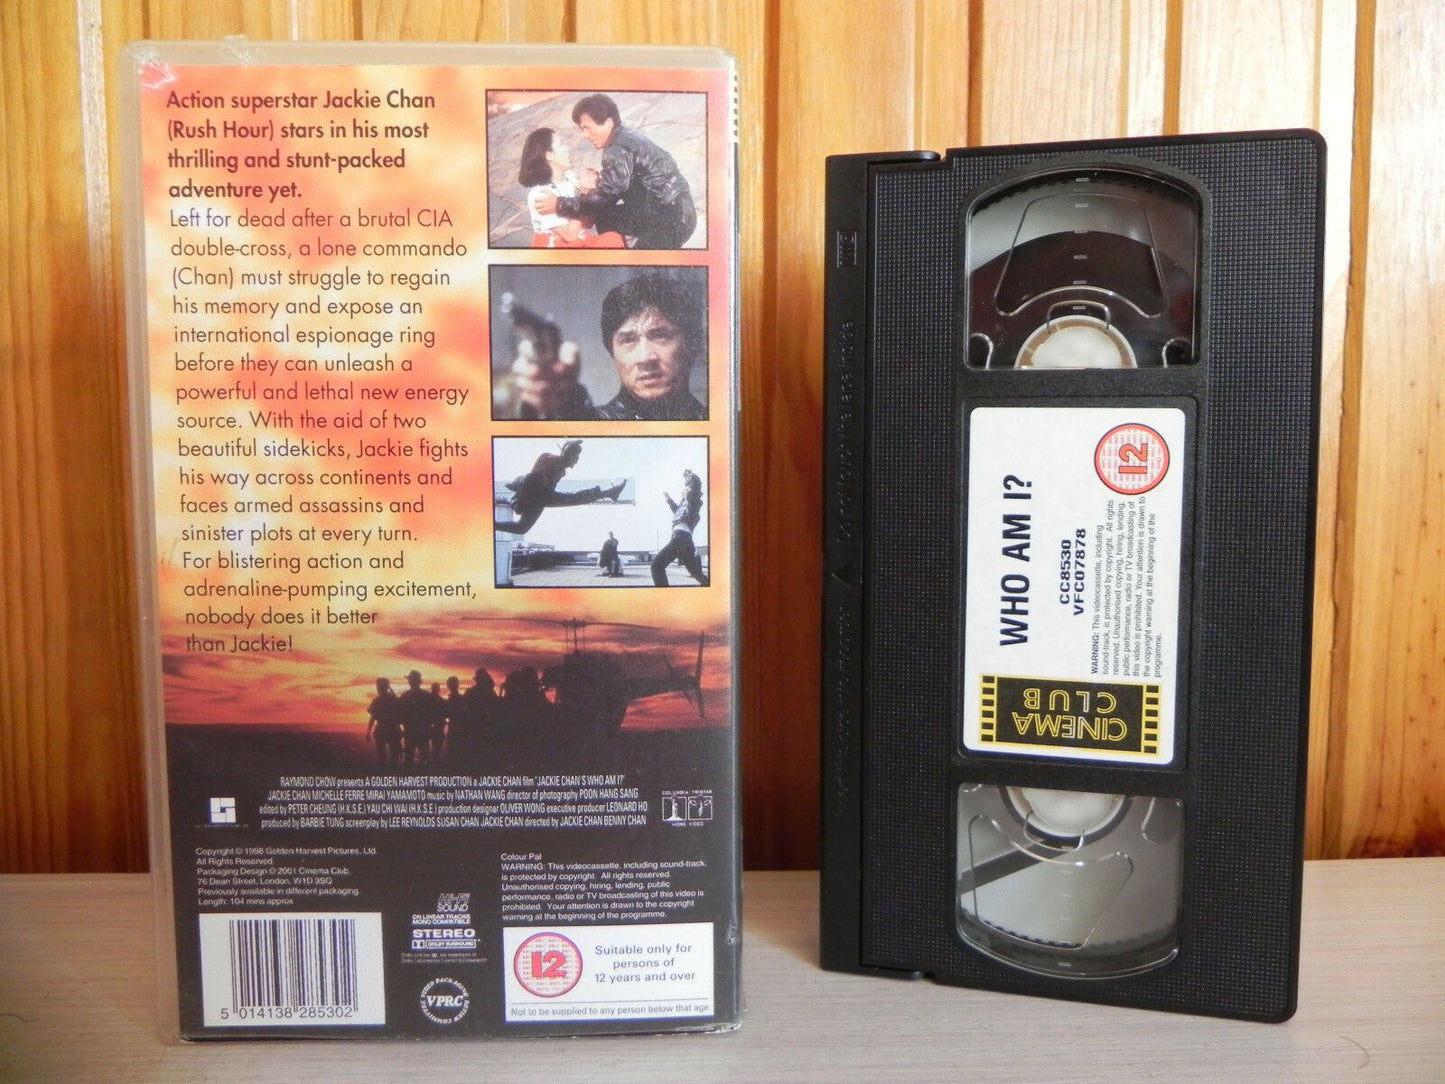 Jackie Chan - Who Am I - Top Stunt KungFu/Wushu - Blistering Family Action - VHS-